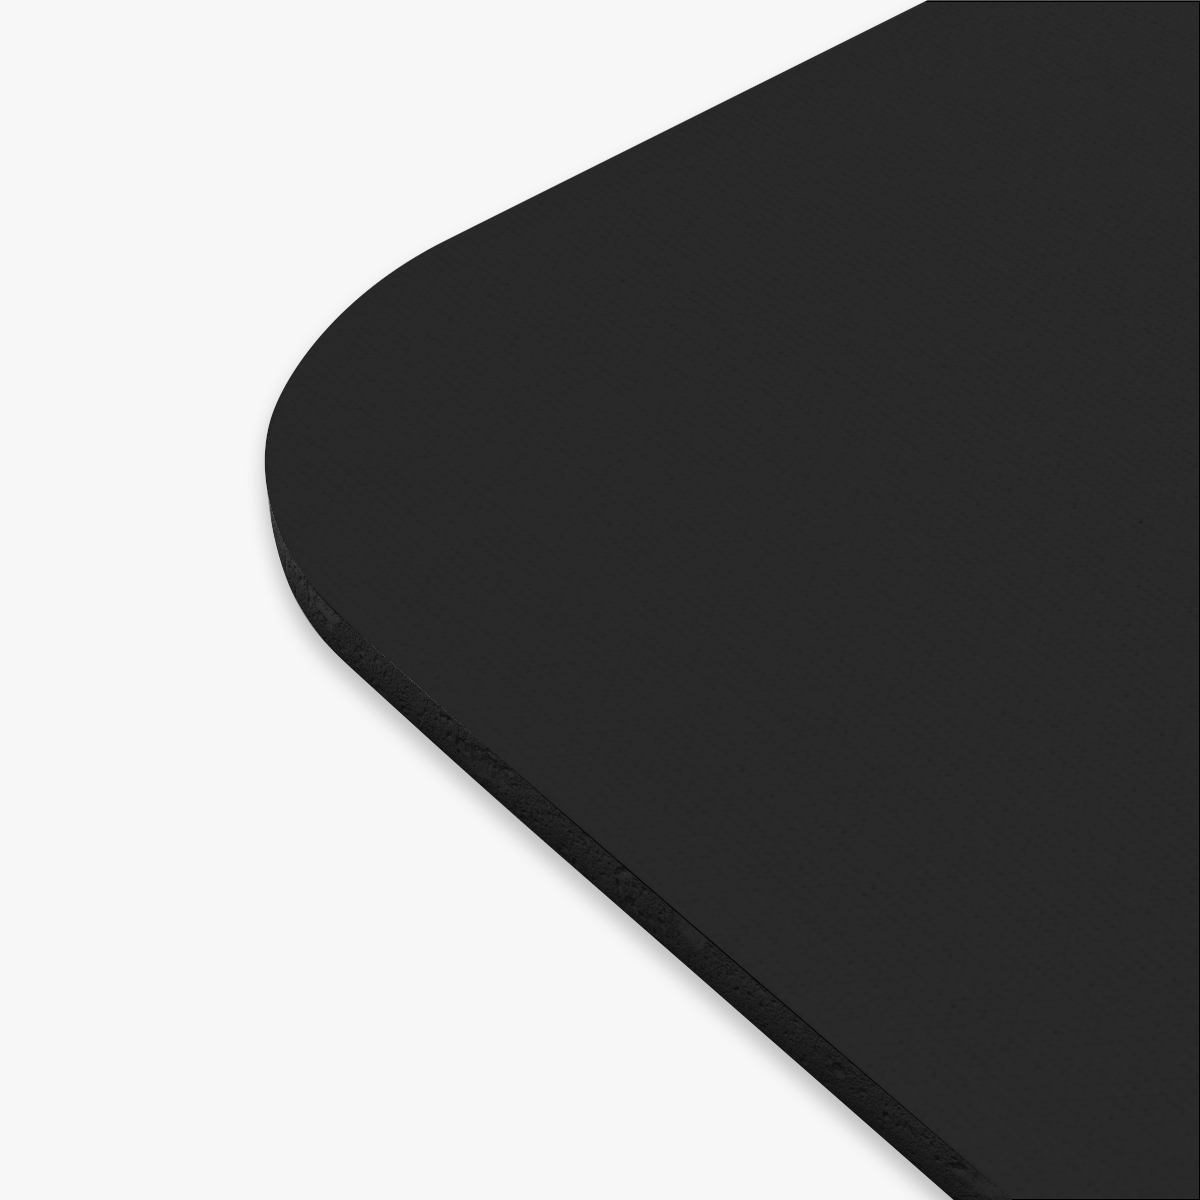 Night Creature Productions Mouse Pad (Rectangle) product thumbnail image